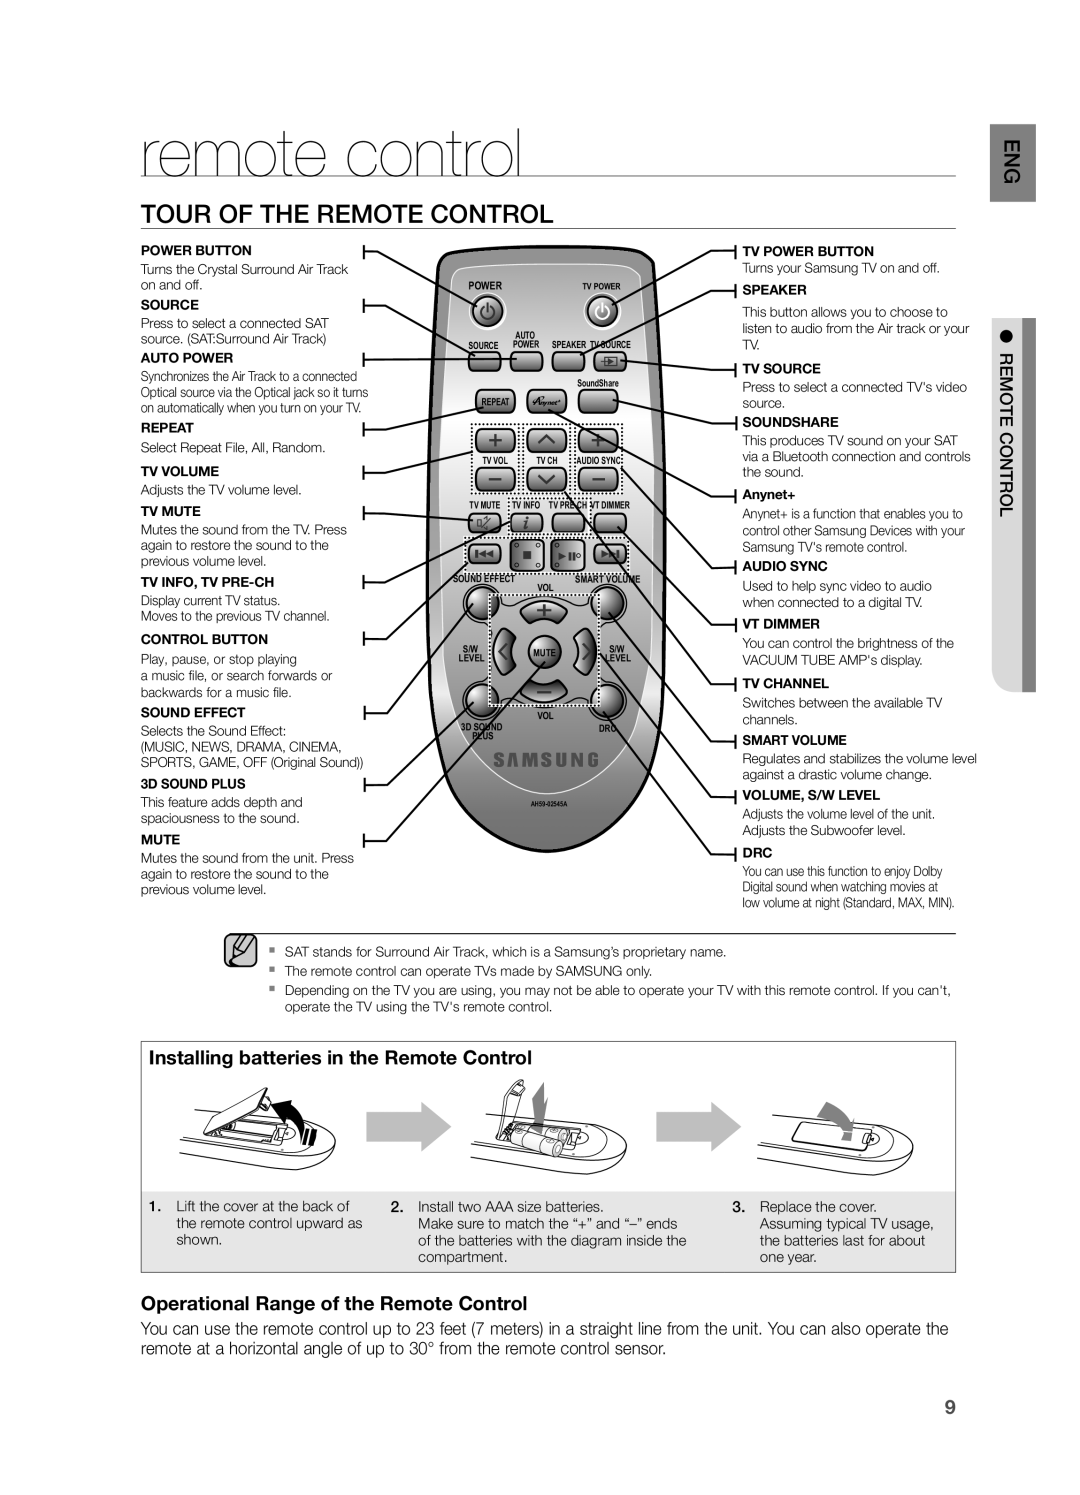 Samsung HW F750, HWF750ZA user manual remote control, Tour of the Remote Control, Installing batteries in the Remote Control 